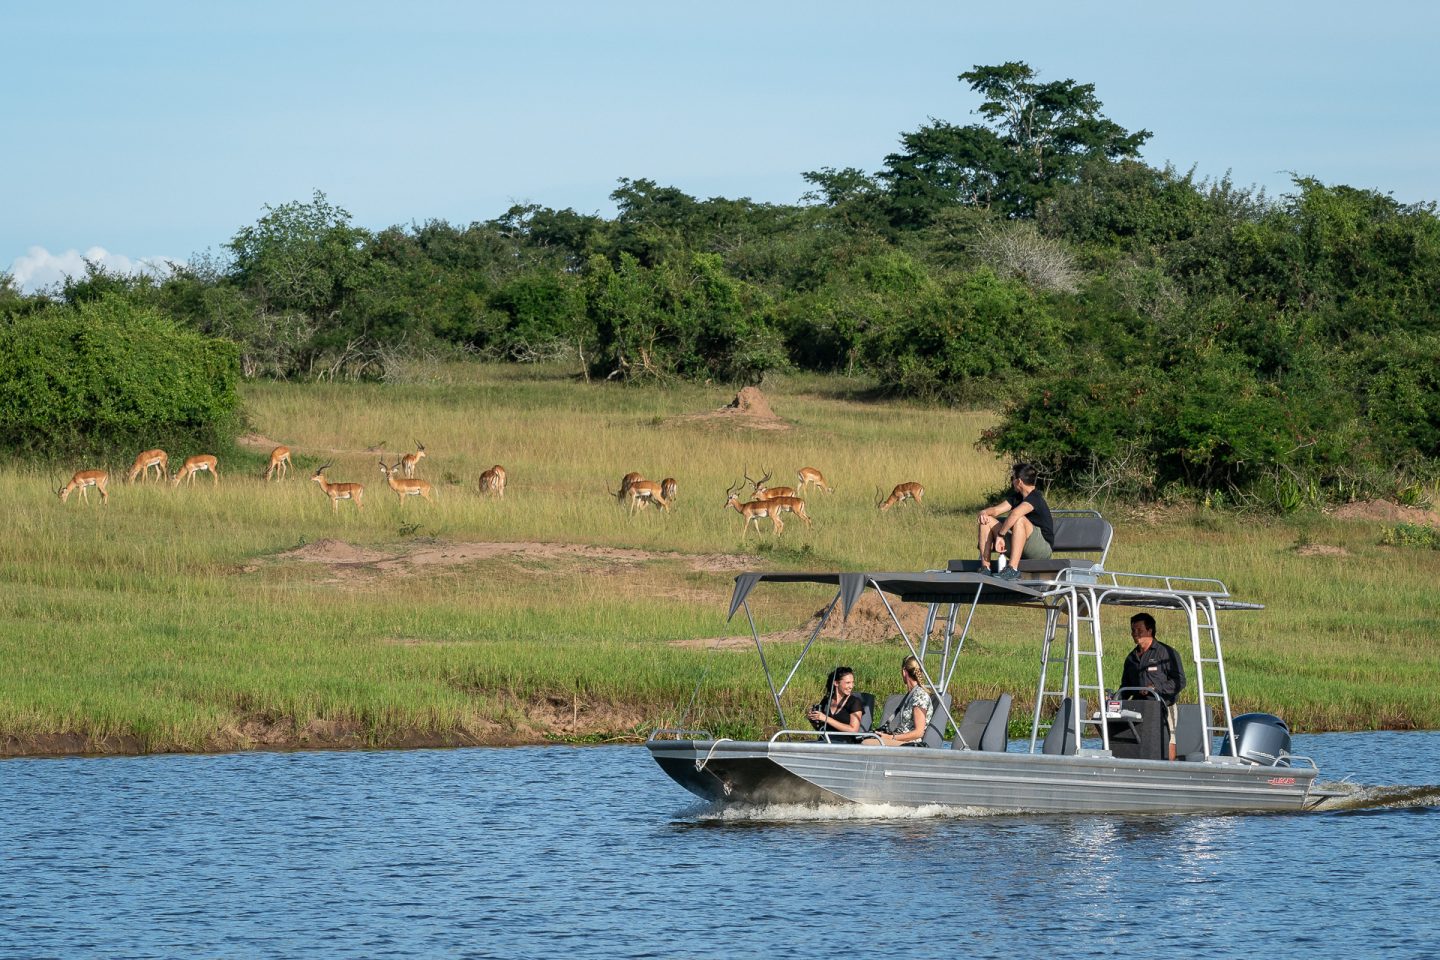 Boating on the lake is a fun way to gain a different perspective of the National Park and it's resident wildlife. The lake is also great for fishing between March - October.